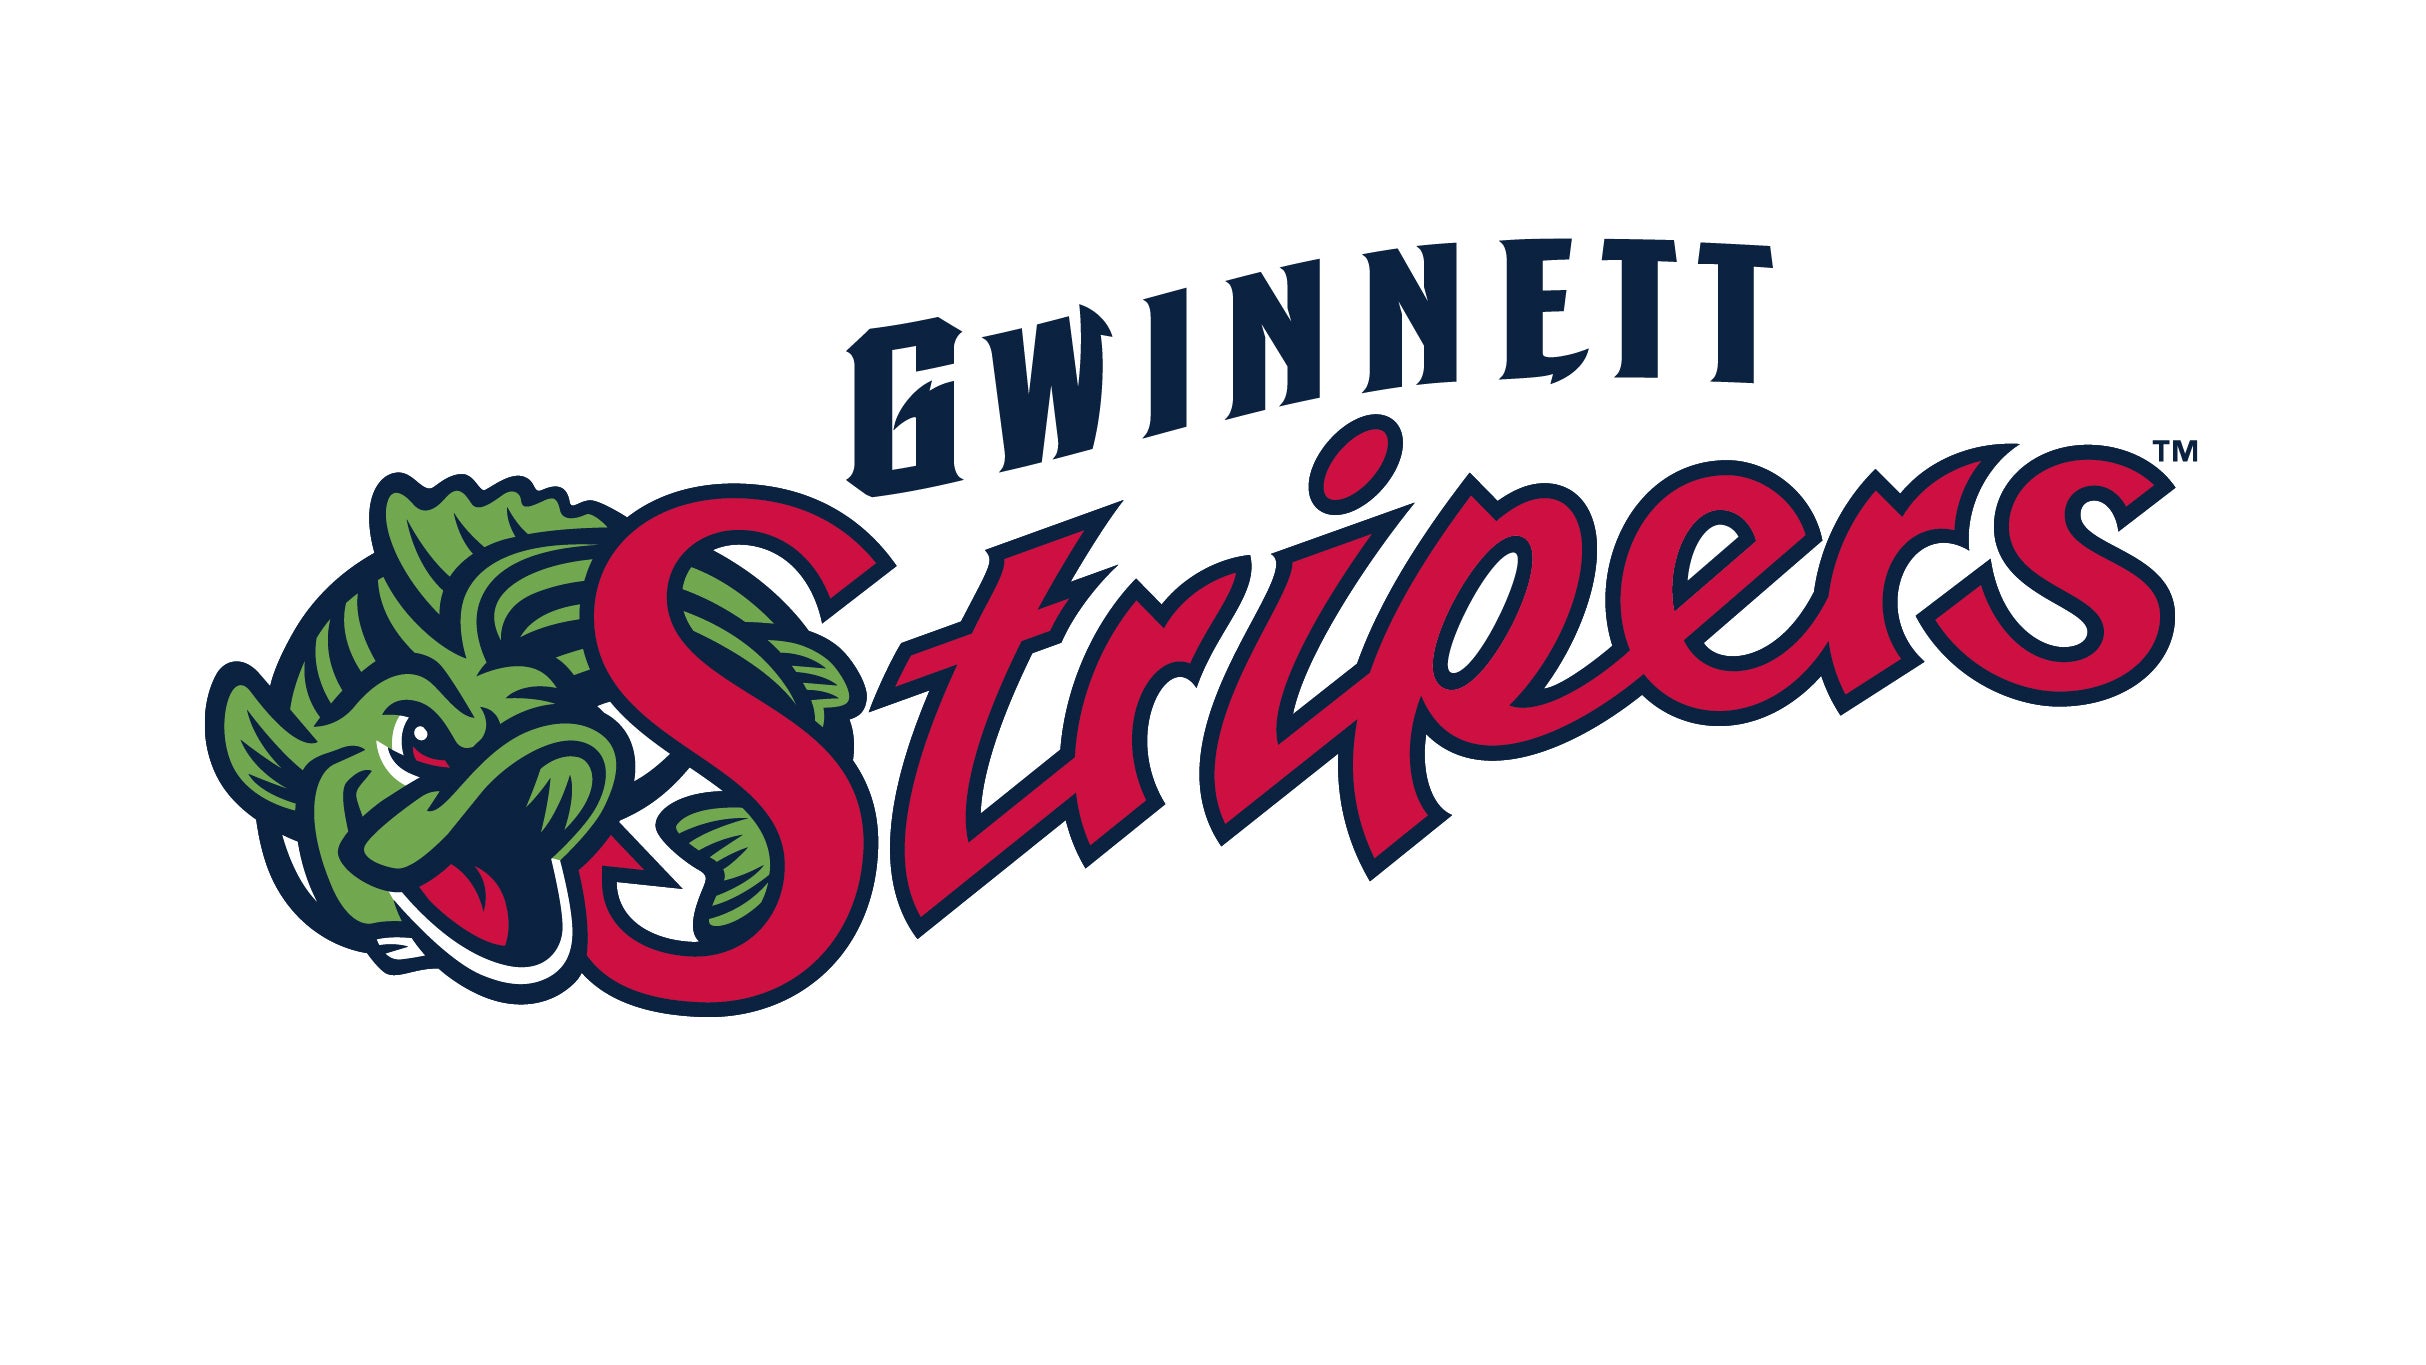 Gwinnett Stripers vs. Columbus Clippers at Coolray Field